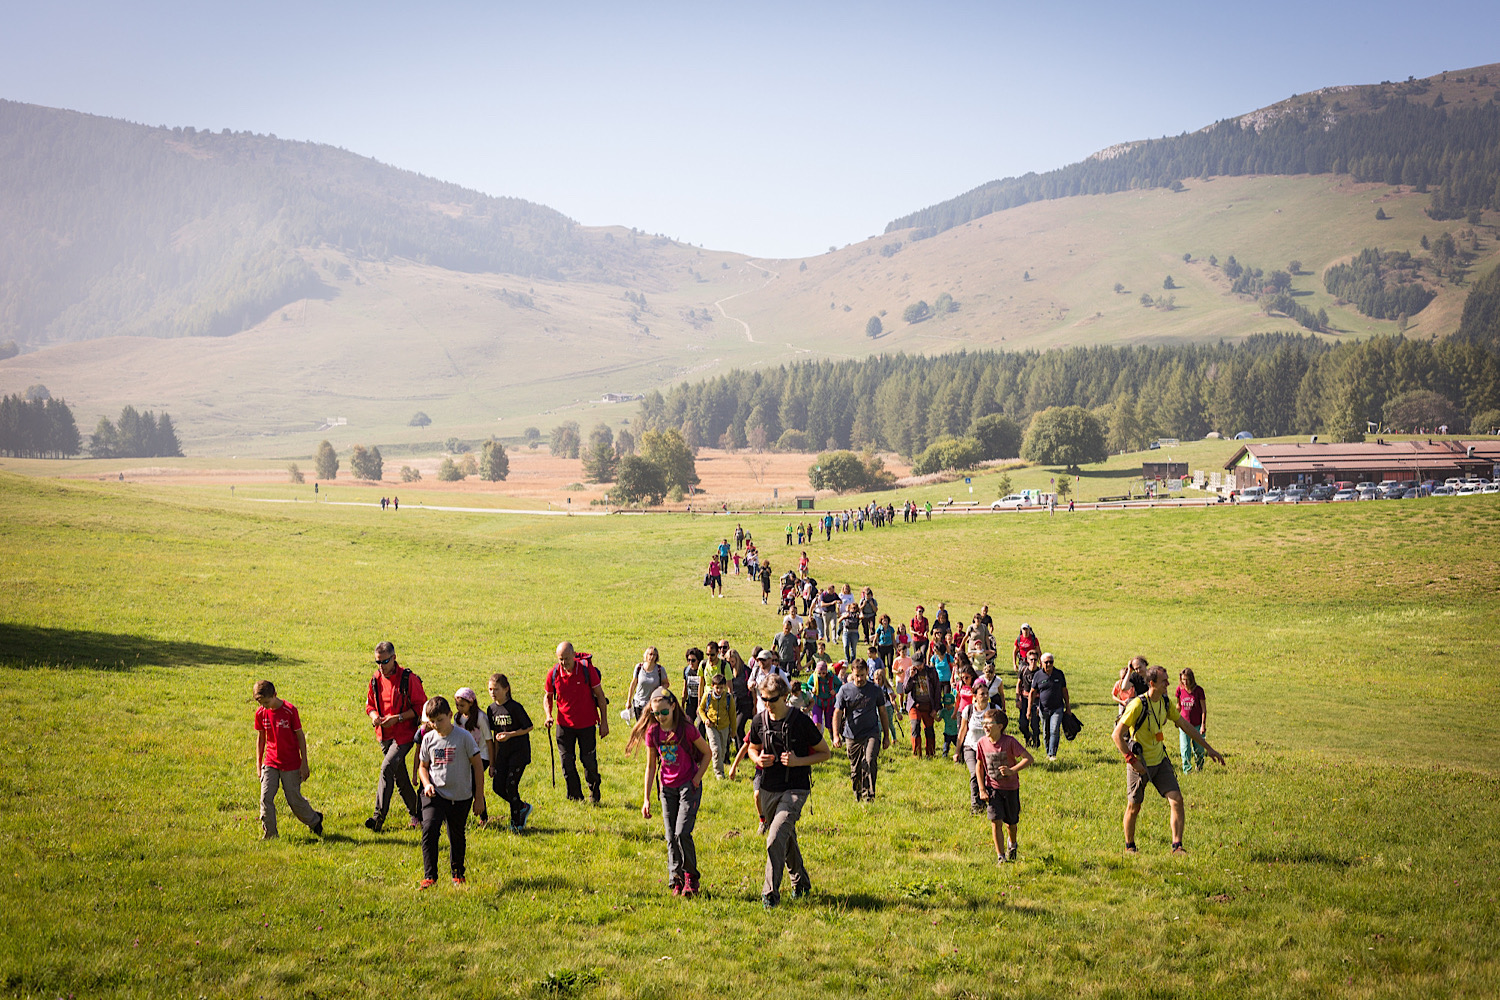 A large group of people walking uphill in an alpine setting